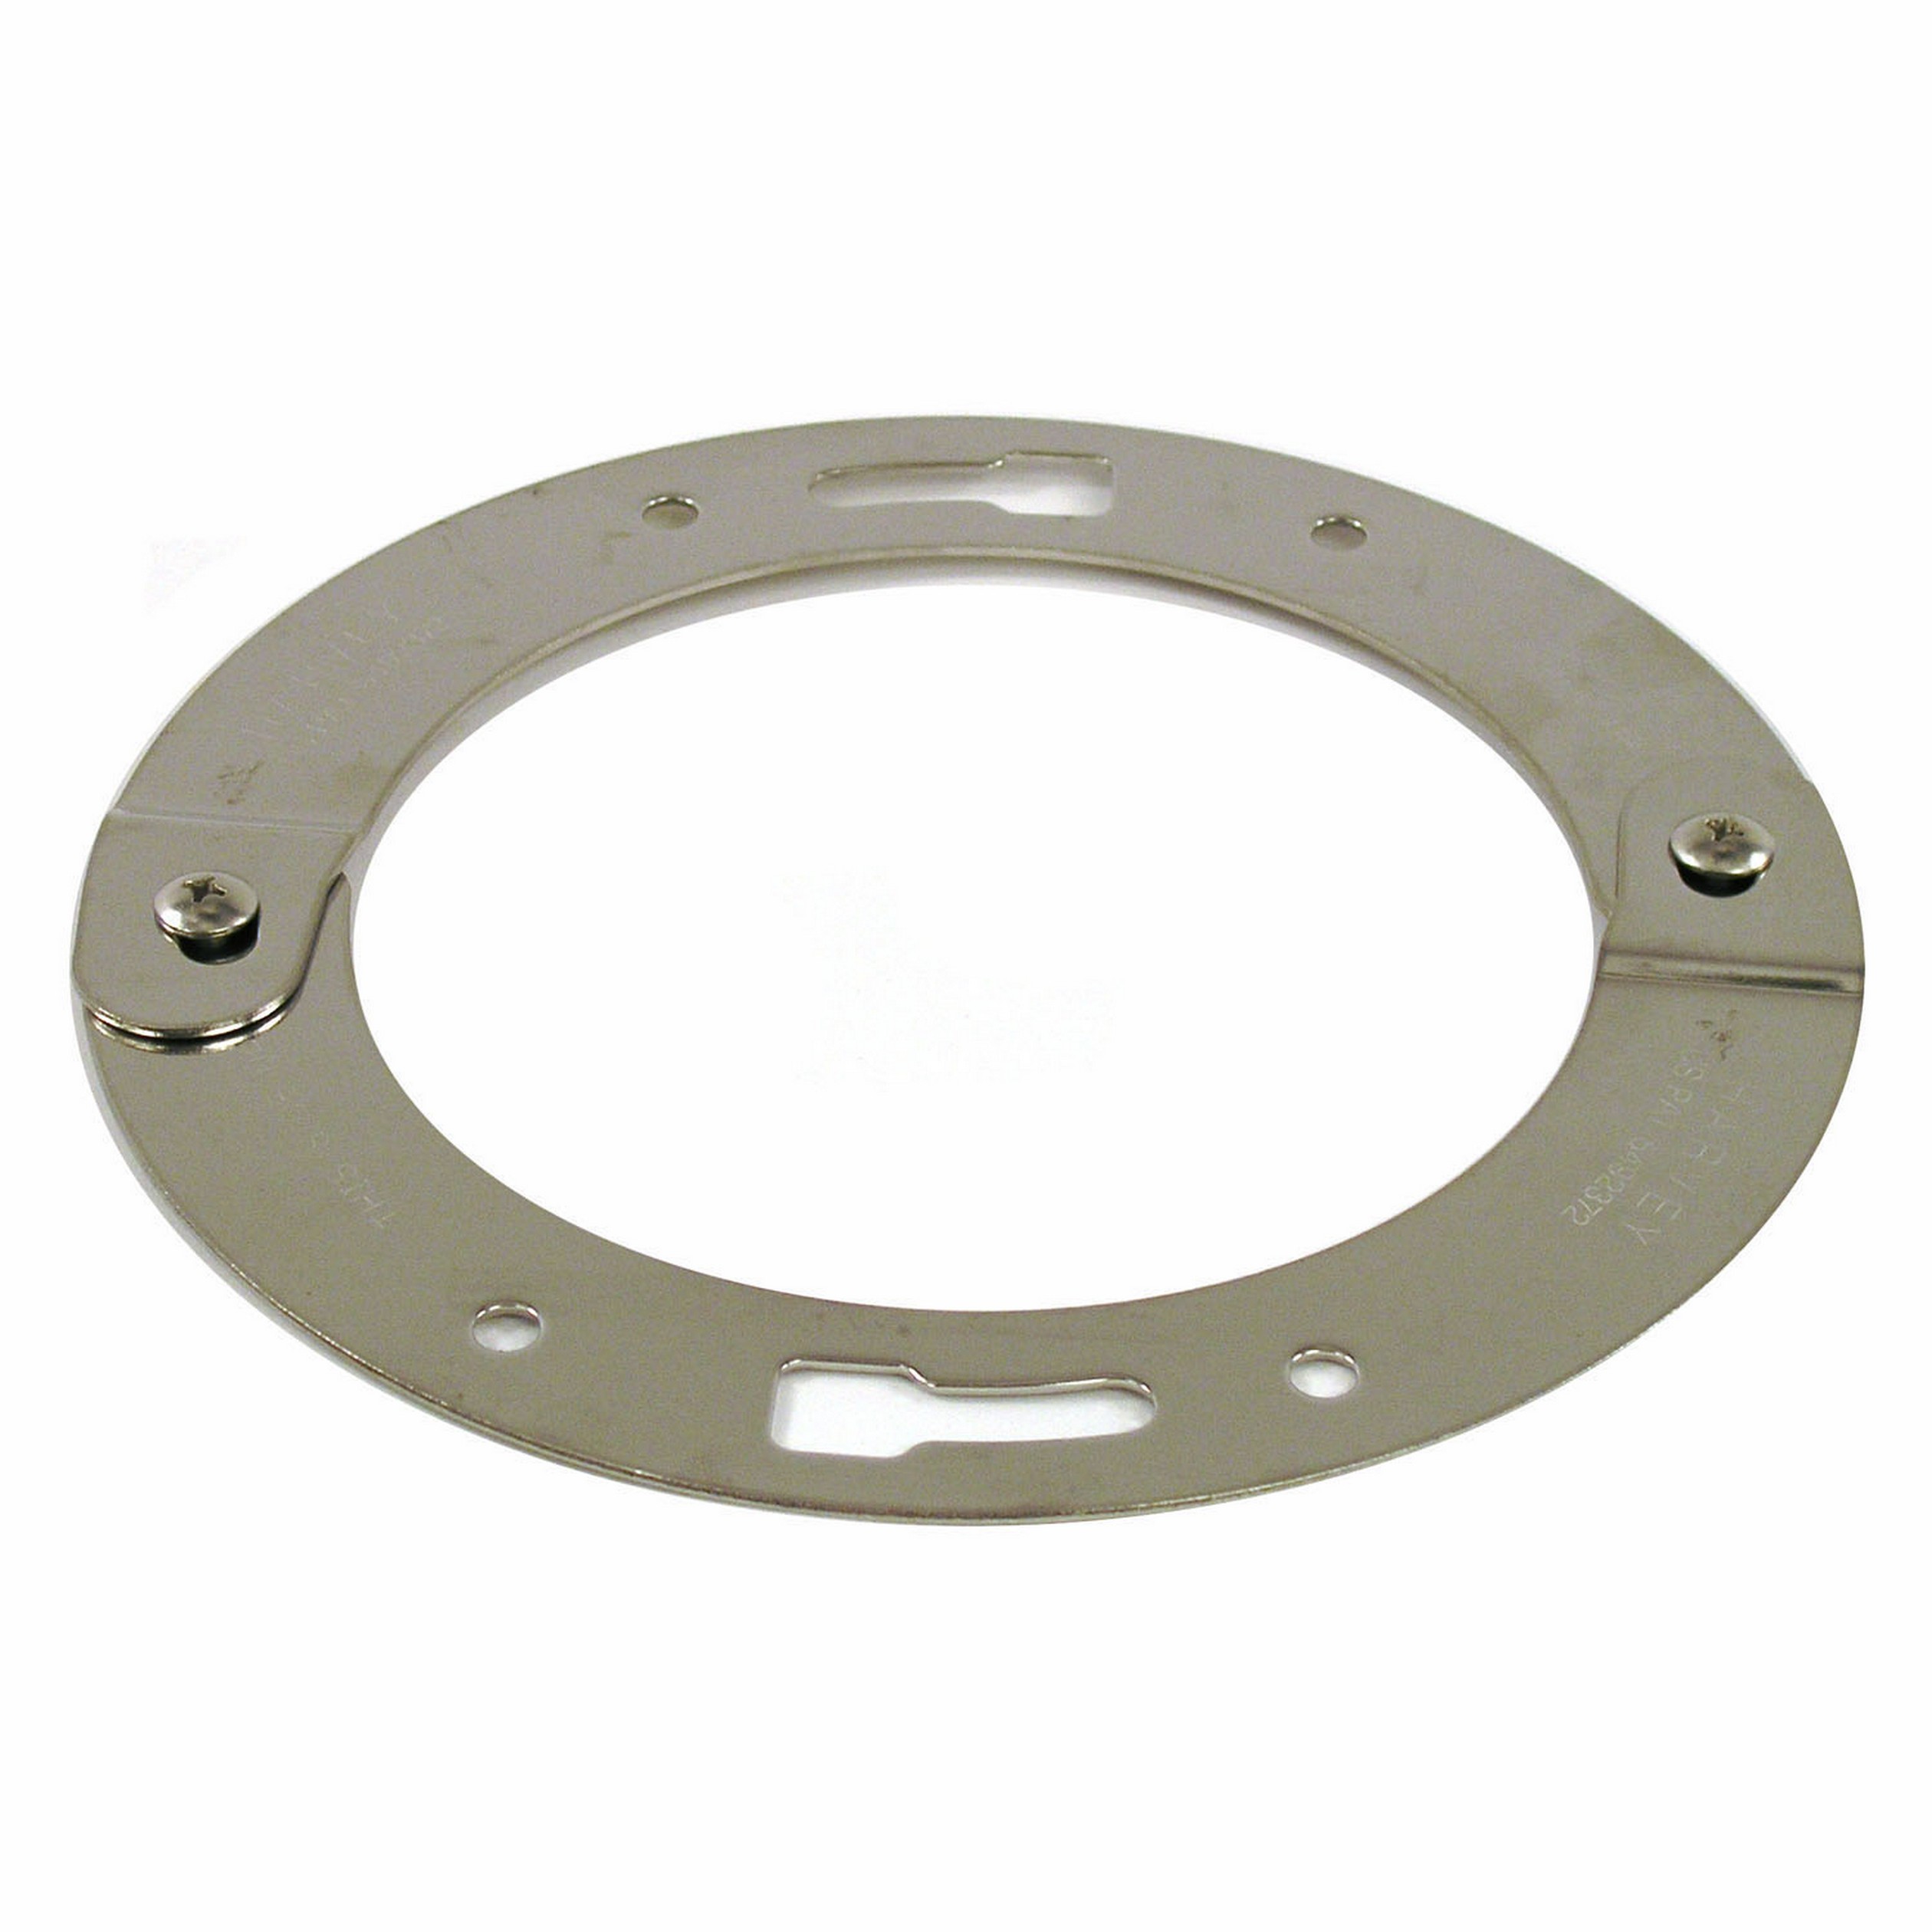 William H. Harvey 014710 Anchor Flange Kit, For Use With Floor to Stabilize Toilet, Stainless Steel